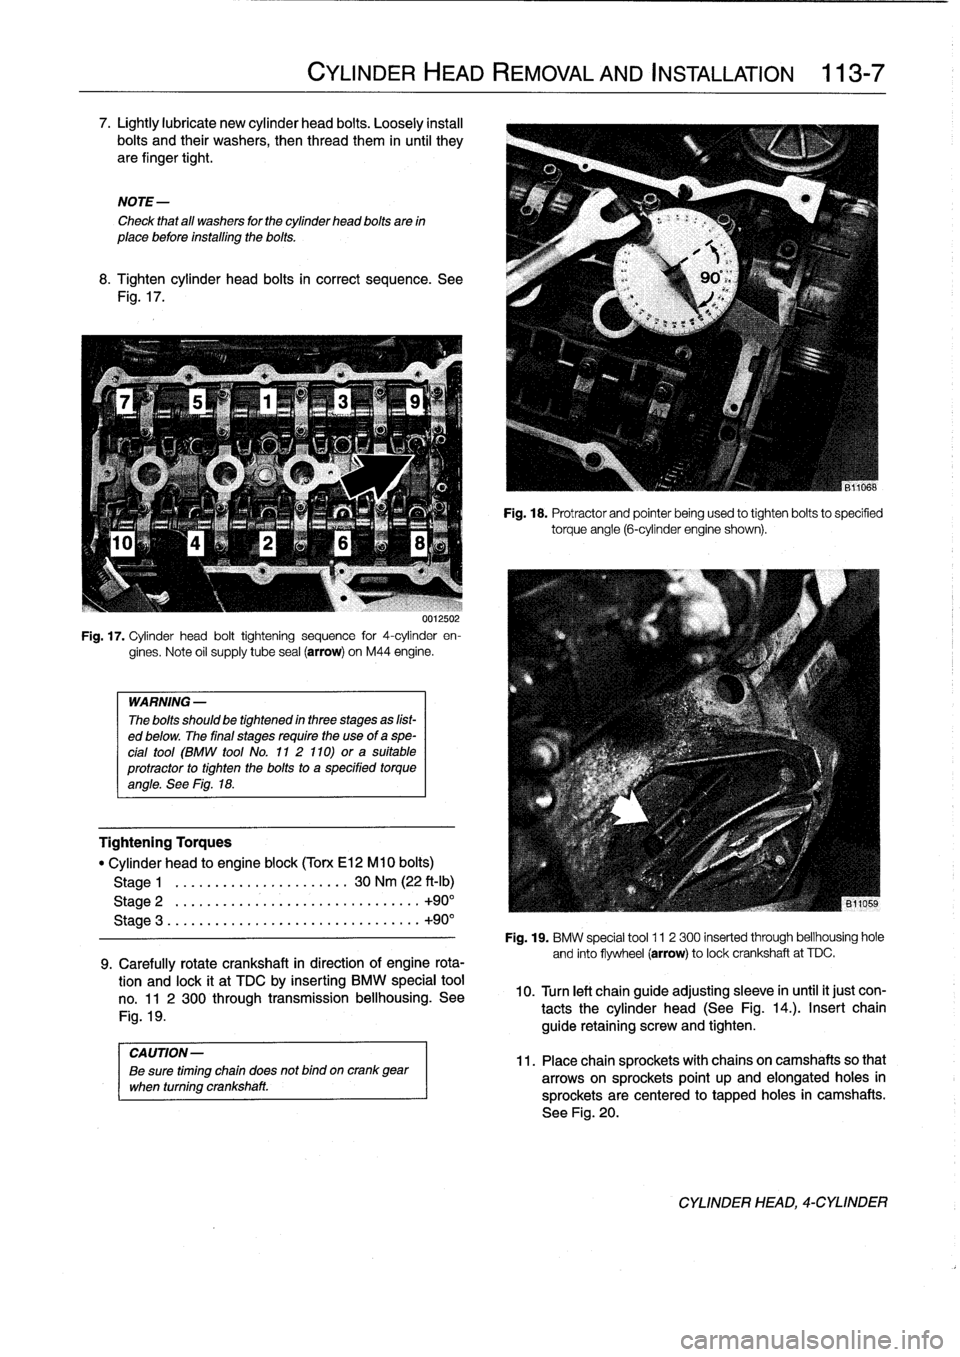 BMW 323i 1993 E36 Workshop Manual 
7
.
Lightly
lubricate
new
cylinder
head
bolts
.
Loosely
instan
bolts
and
their
washers,
then
thread
them
in
until
they
are
finger
tight
.

NOTE-

Check
that
all
washers
for
the
cylinder
head
bolts
ar